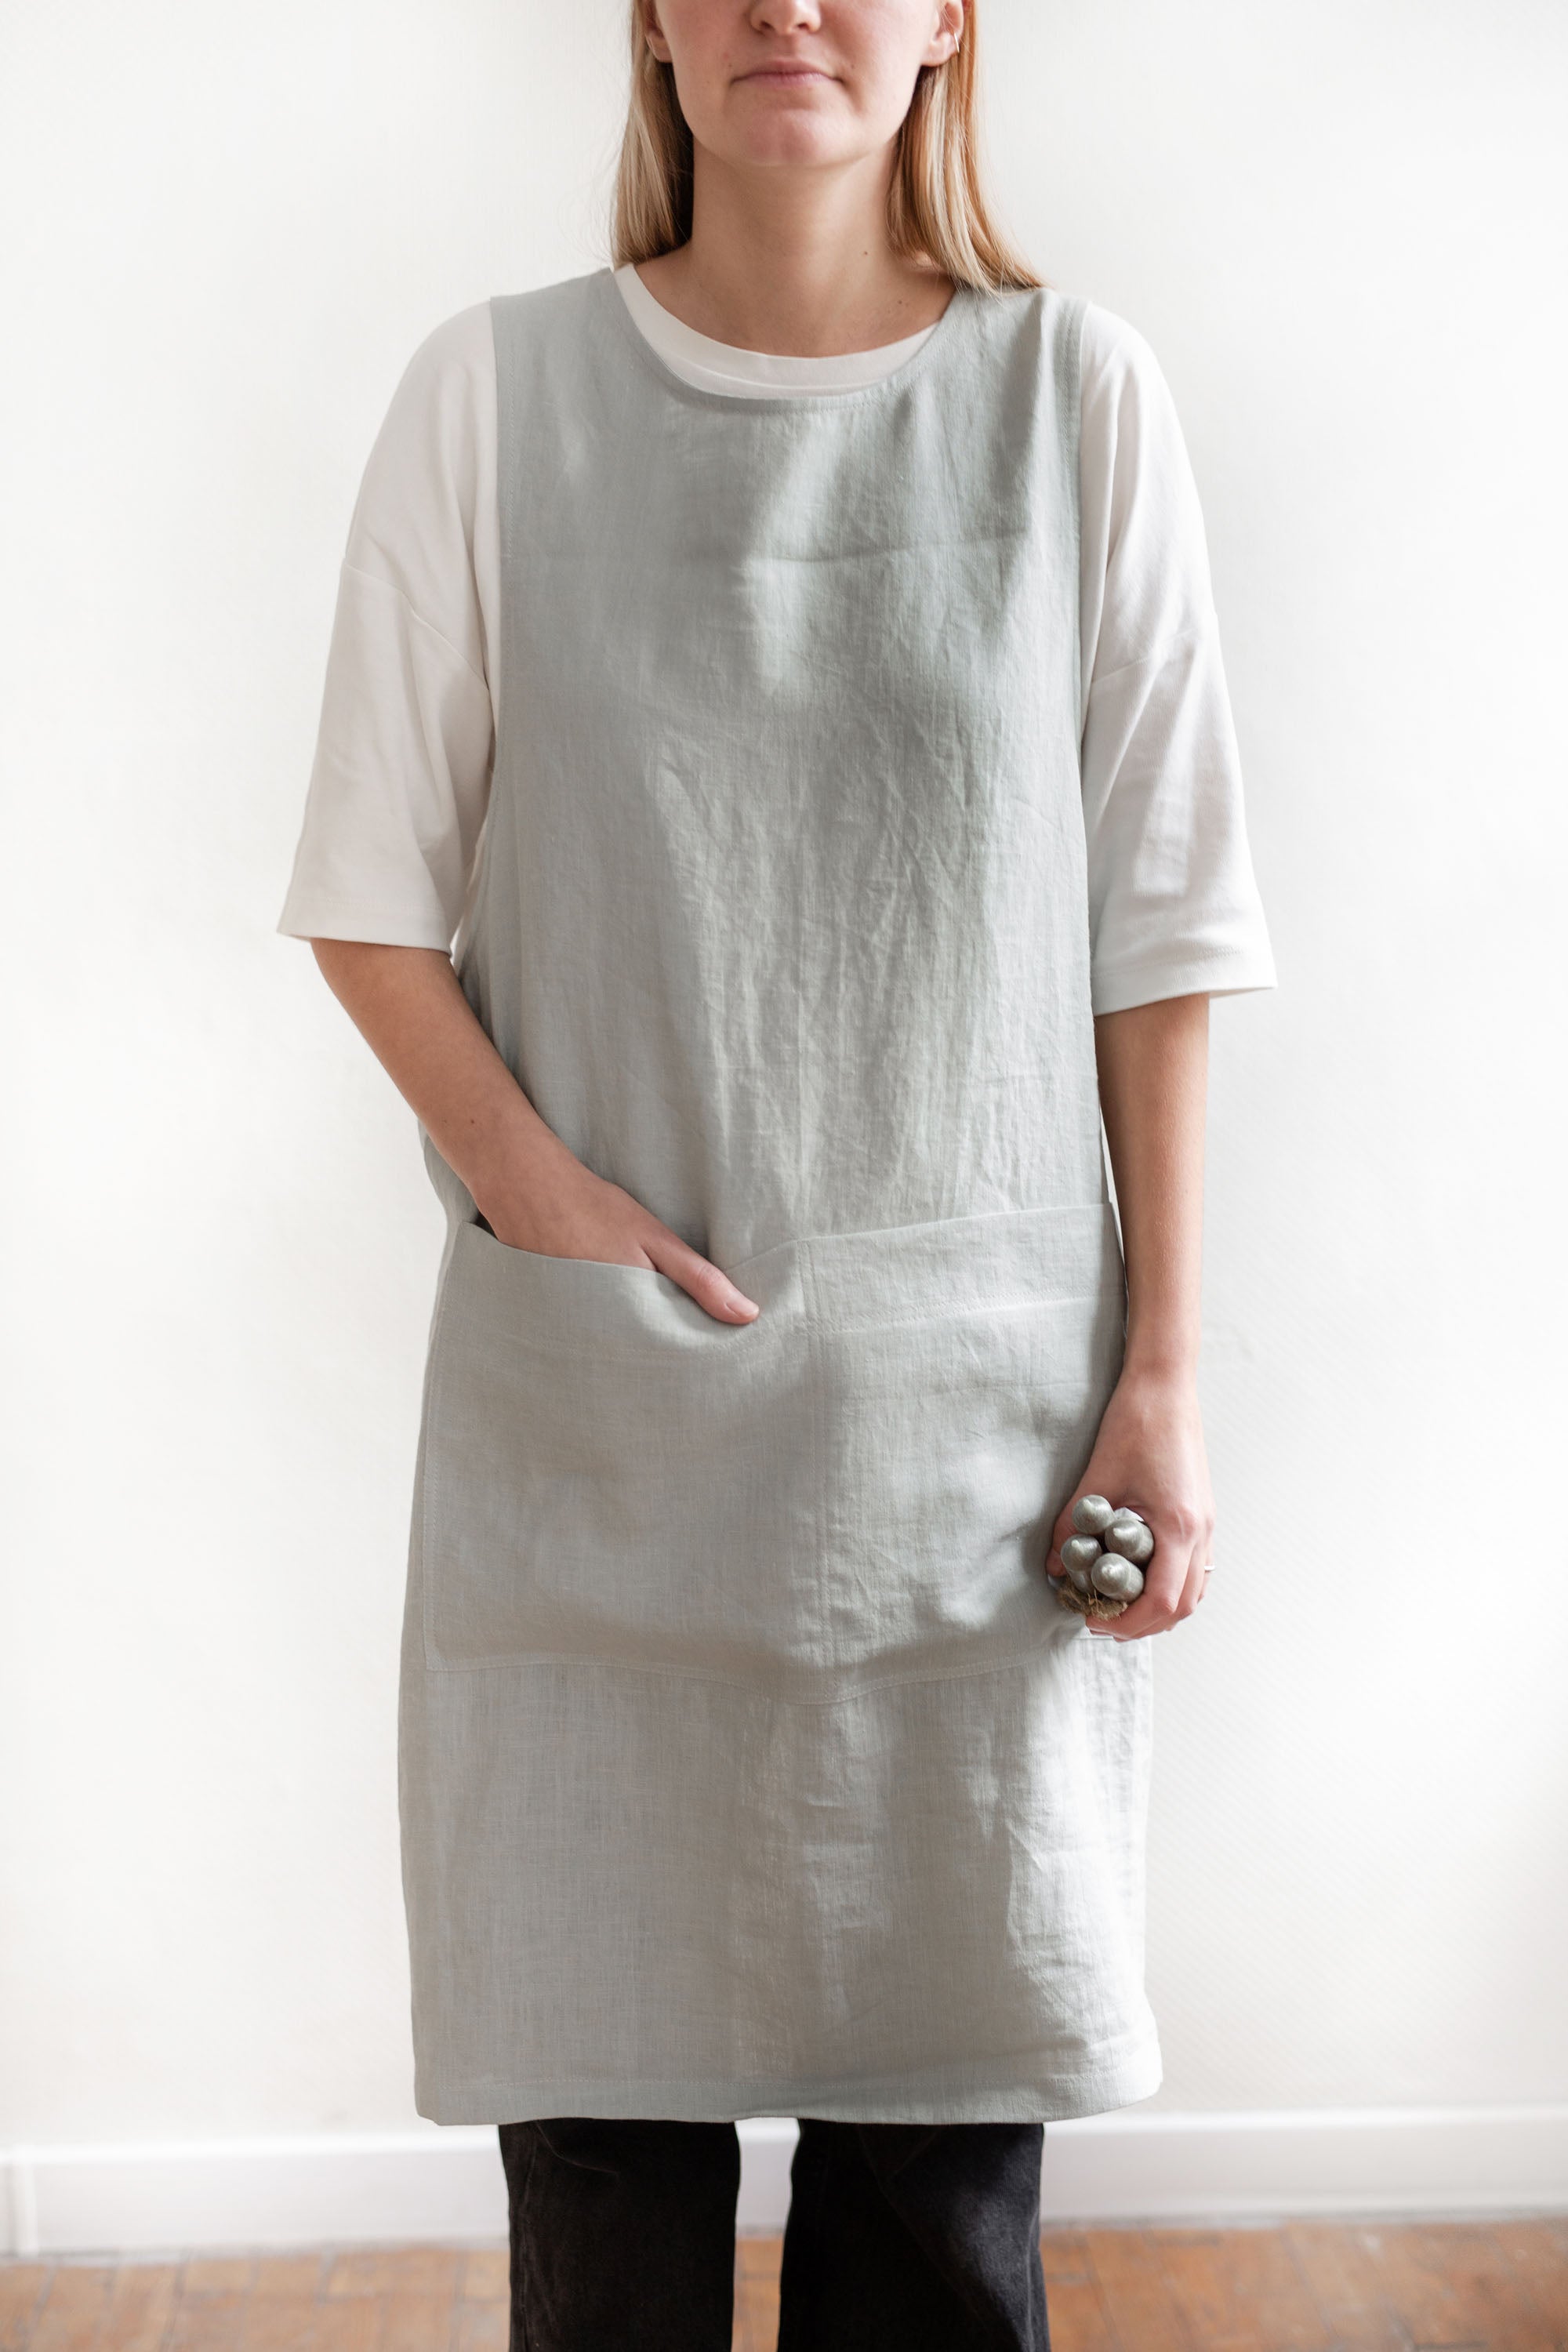 Front OF Pinafore Linen Apron In Cotton Candy By AmourlInen